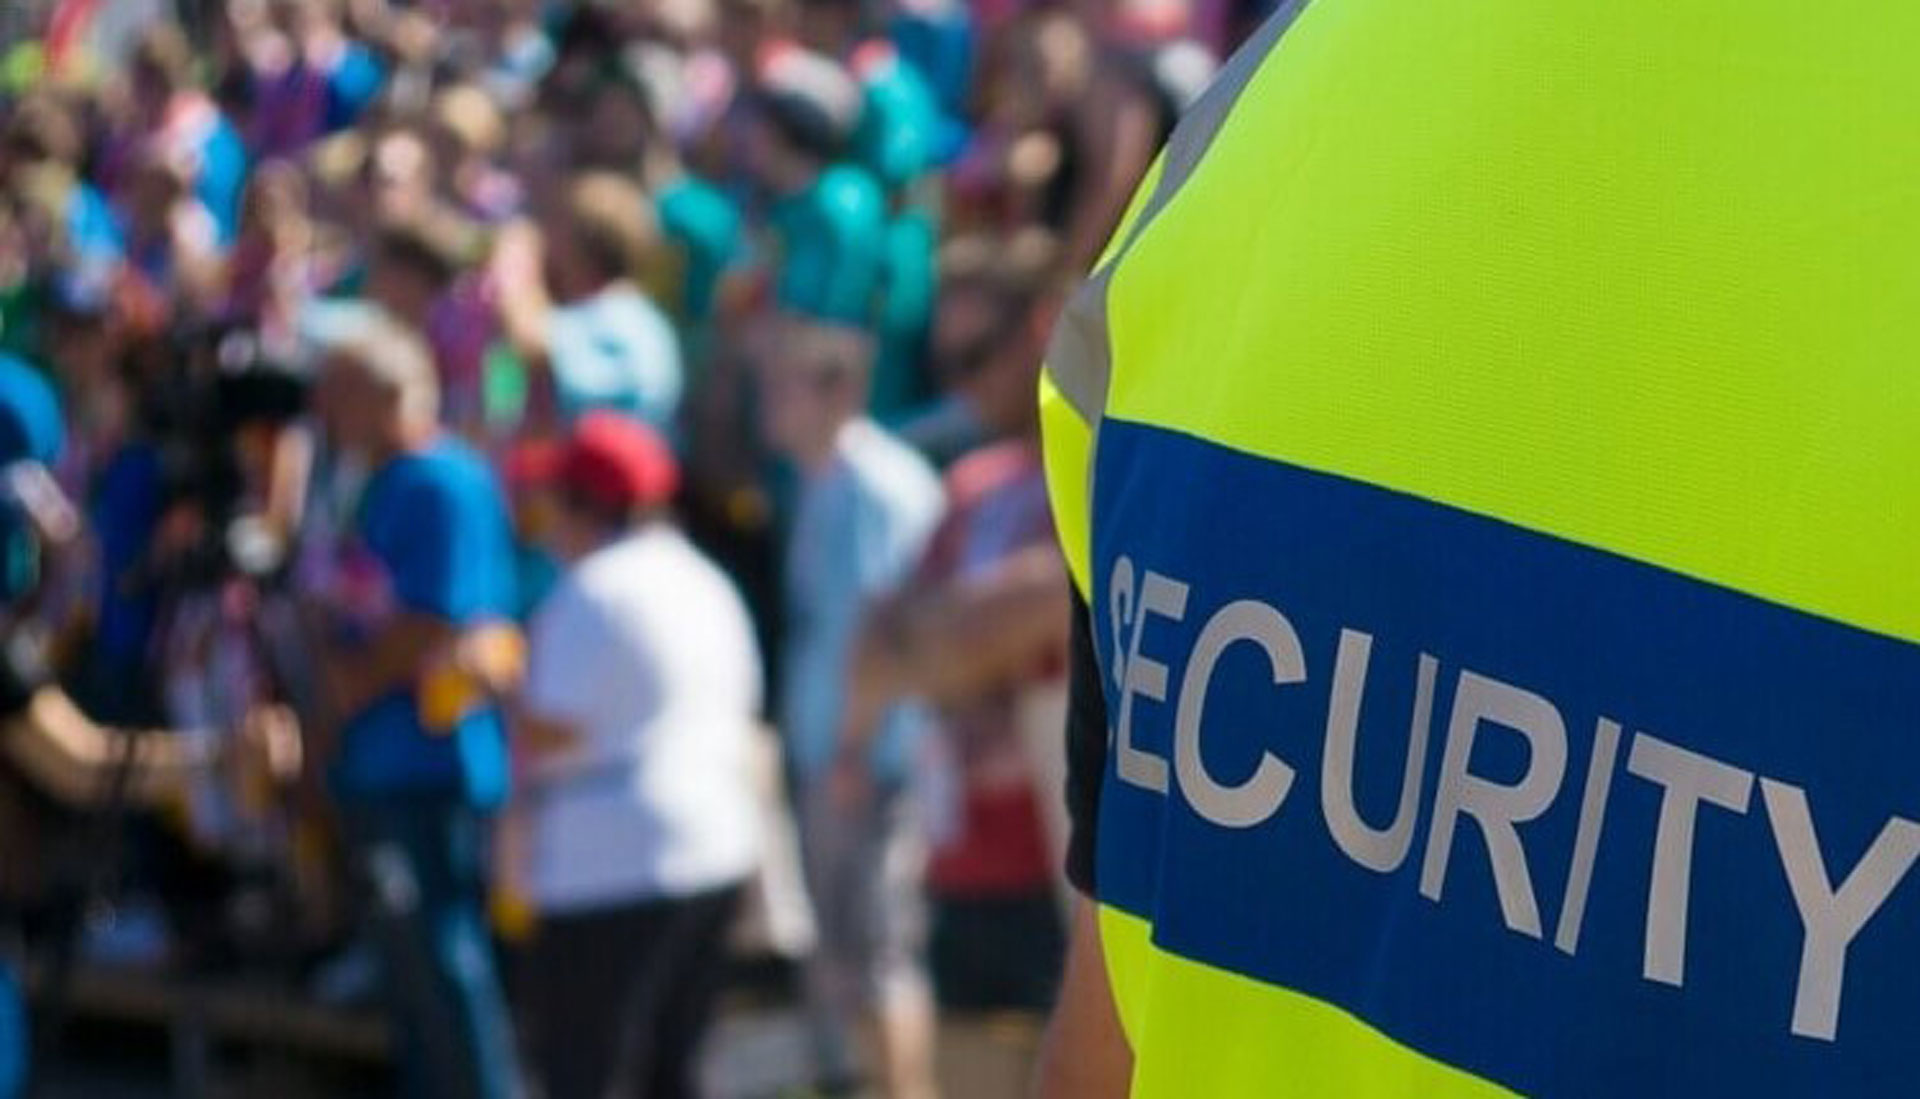 5 Reasons Why Event Security Is So Important